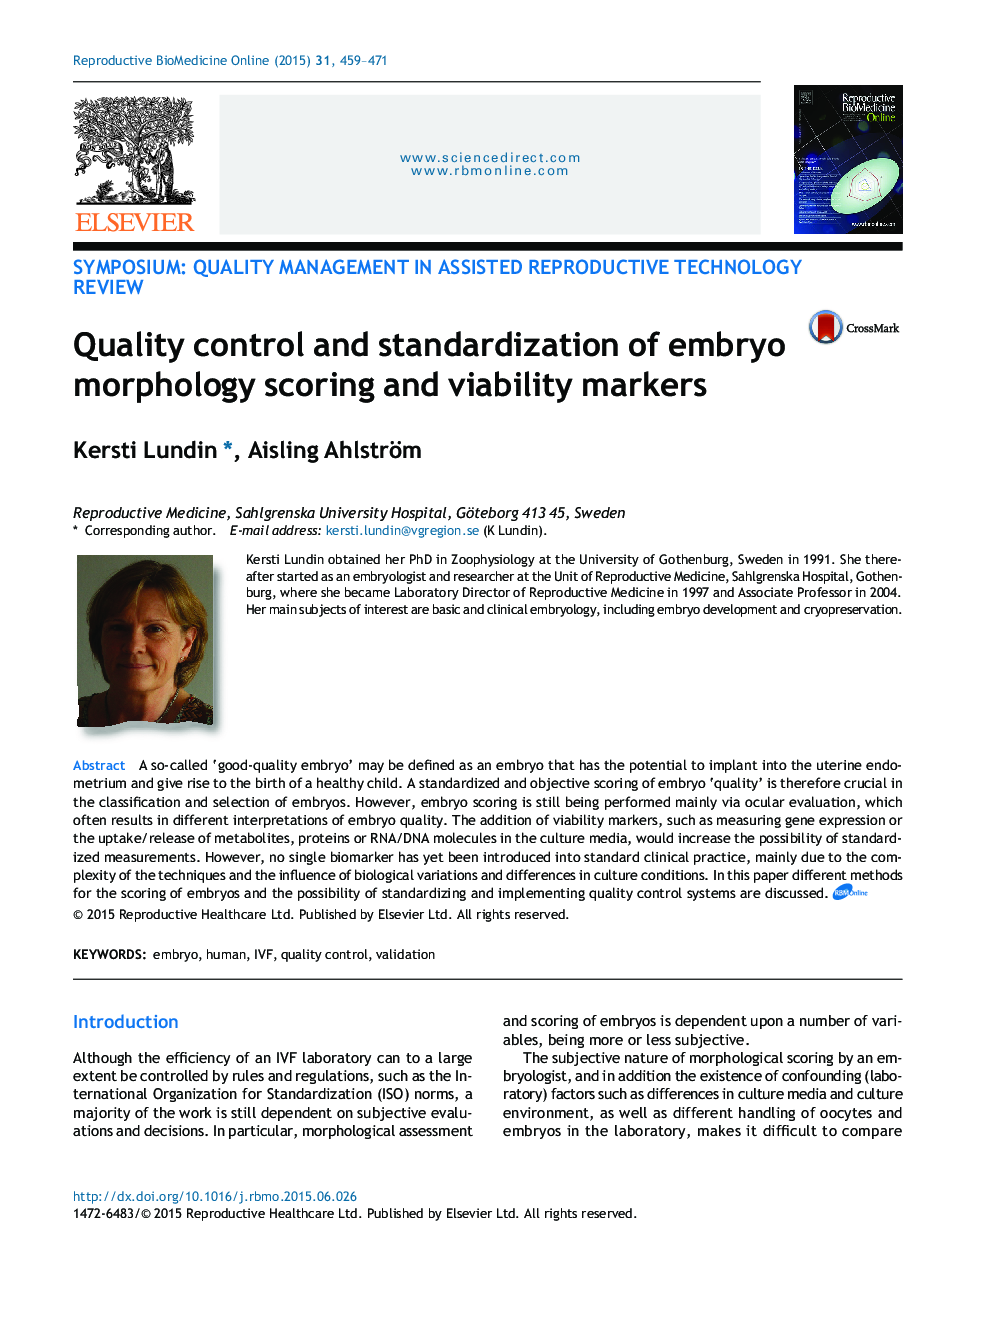 Quality control and standardization of embryo morphology scoring and viability markers